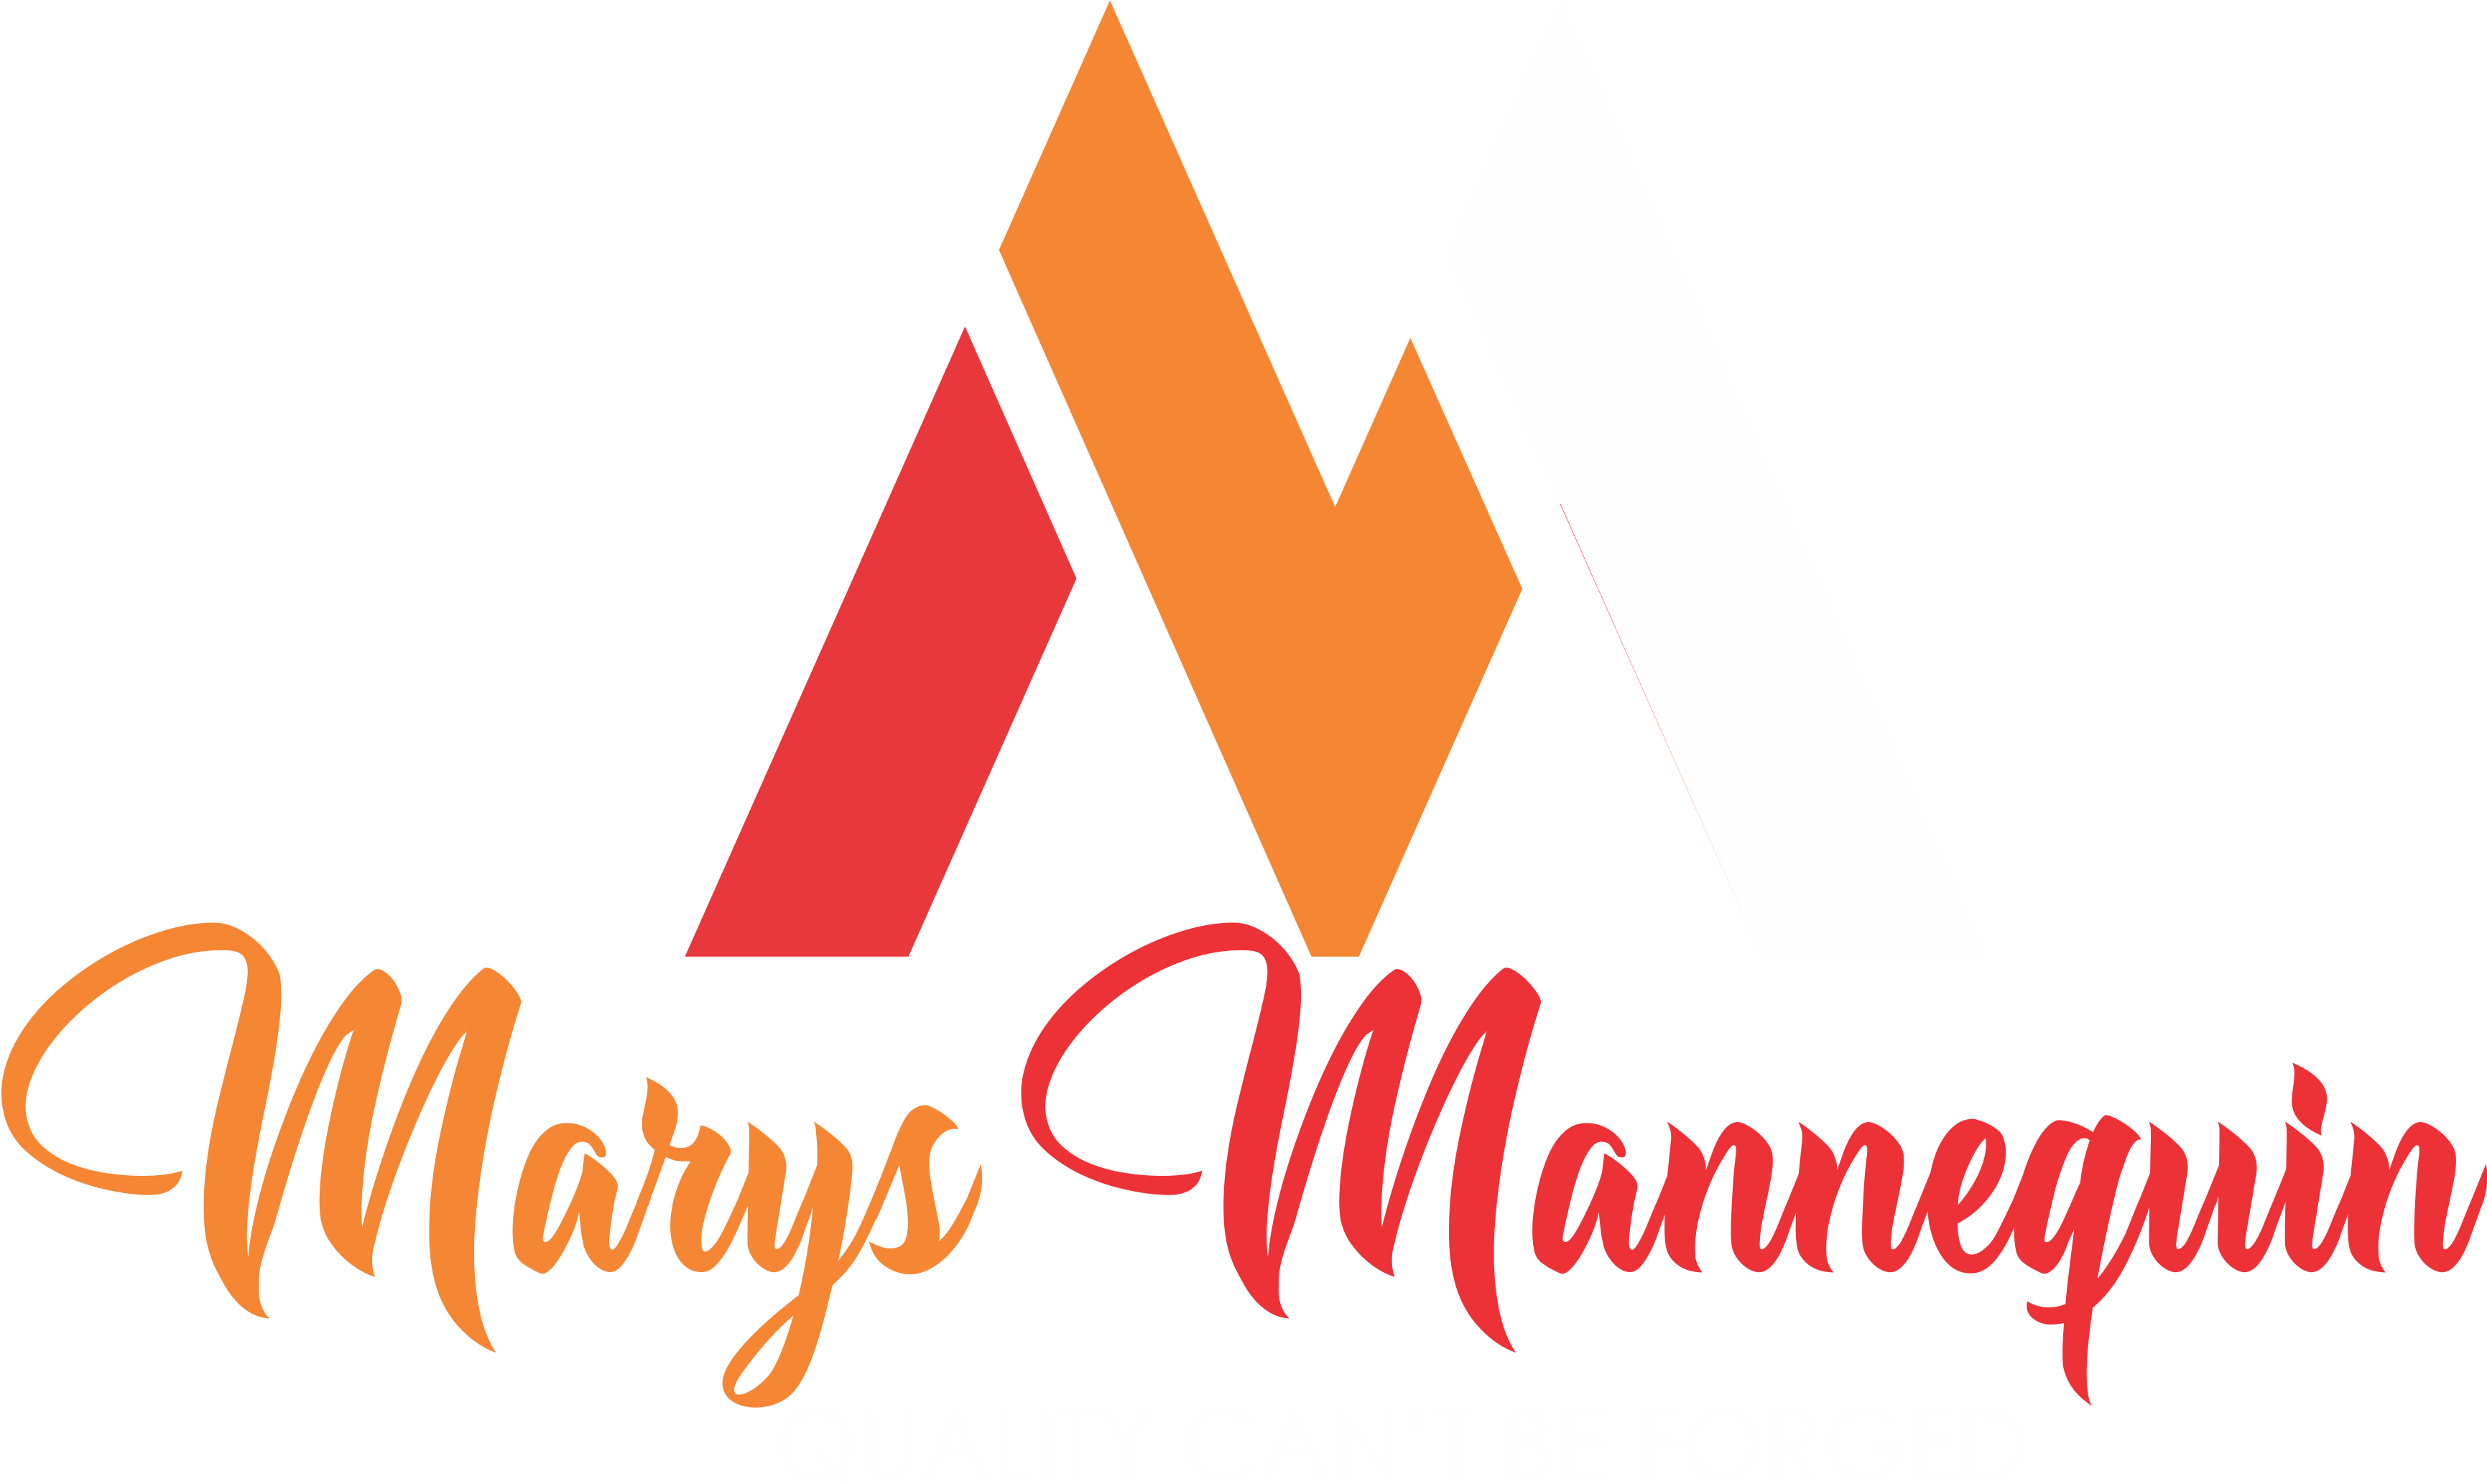 Mary's Mannequin - Quality cant be forged